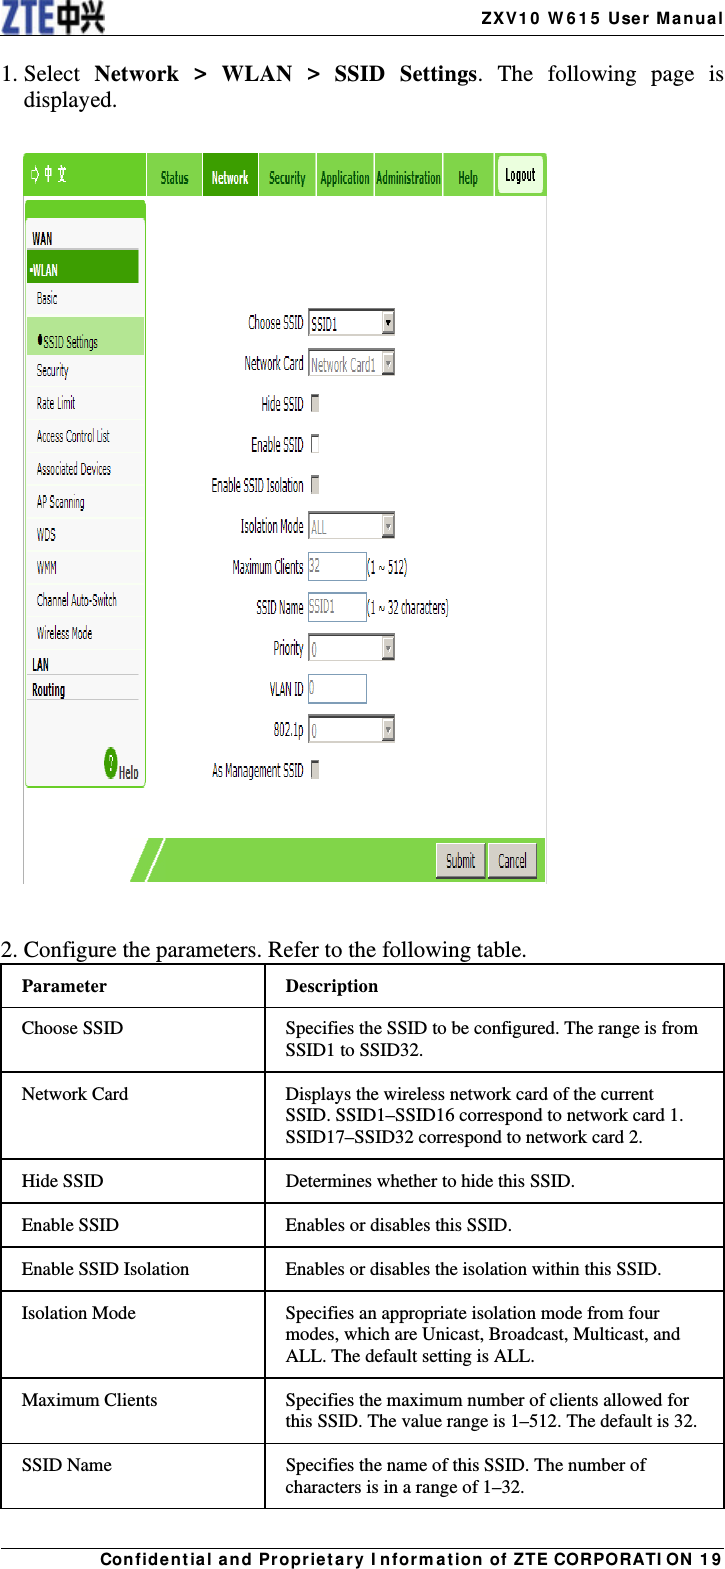    ZX V1 0  W 6 1 5  User Manua lCon fidentia l and Propriet a ry I nform a t ion of ZTE CORPORATI ON  1 9 1. Select  Network &gt; WLAN &gt; SSID Settings. The following page is displayed.    2. Configure the parameters. Refer to the following table. Parameter Description Choose SSID  Specifies the SSID to be configured. The range is from SSID1 to SSID32. Network Card  Displays the wireless network card of the current SSID. SSID1–SSID16 correspond to network card 1. SSID17–SSID32 correspond to network card 2. Hide SSID  Determines whether to hide this SSID. Enable SSID  Enables or disables this SSID. Enable SSID Isolation  Enables or disables the isolation within this SSID. Isolation Mode  Specifies an appropriate isolation mode from four modes, which are Unicast, Broadcast, Multicast, and ALL. The default setting is ALL. Maximum Clients  Specifies the maximum number of clients allowed for this SSID. The value range is 1–512. The default is 32. SSID Name  Specifies the name of this SSID. The number of characters is in a range of 1–32. 